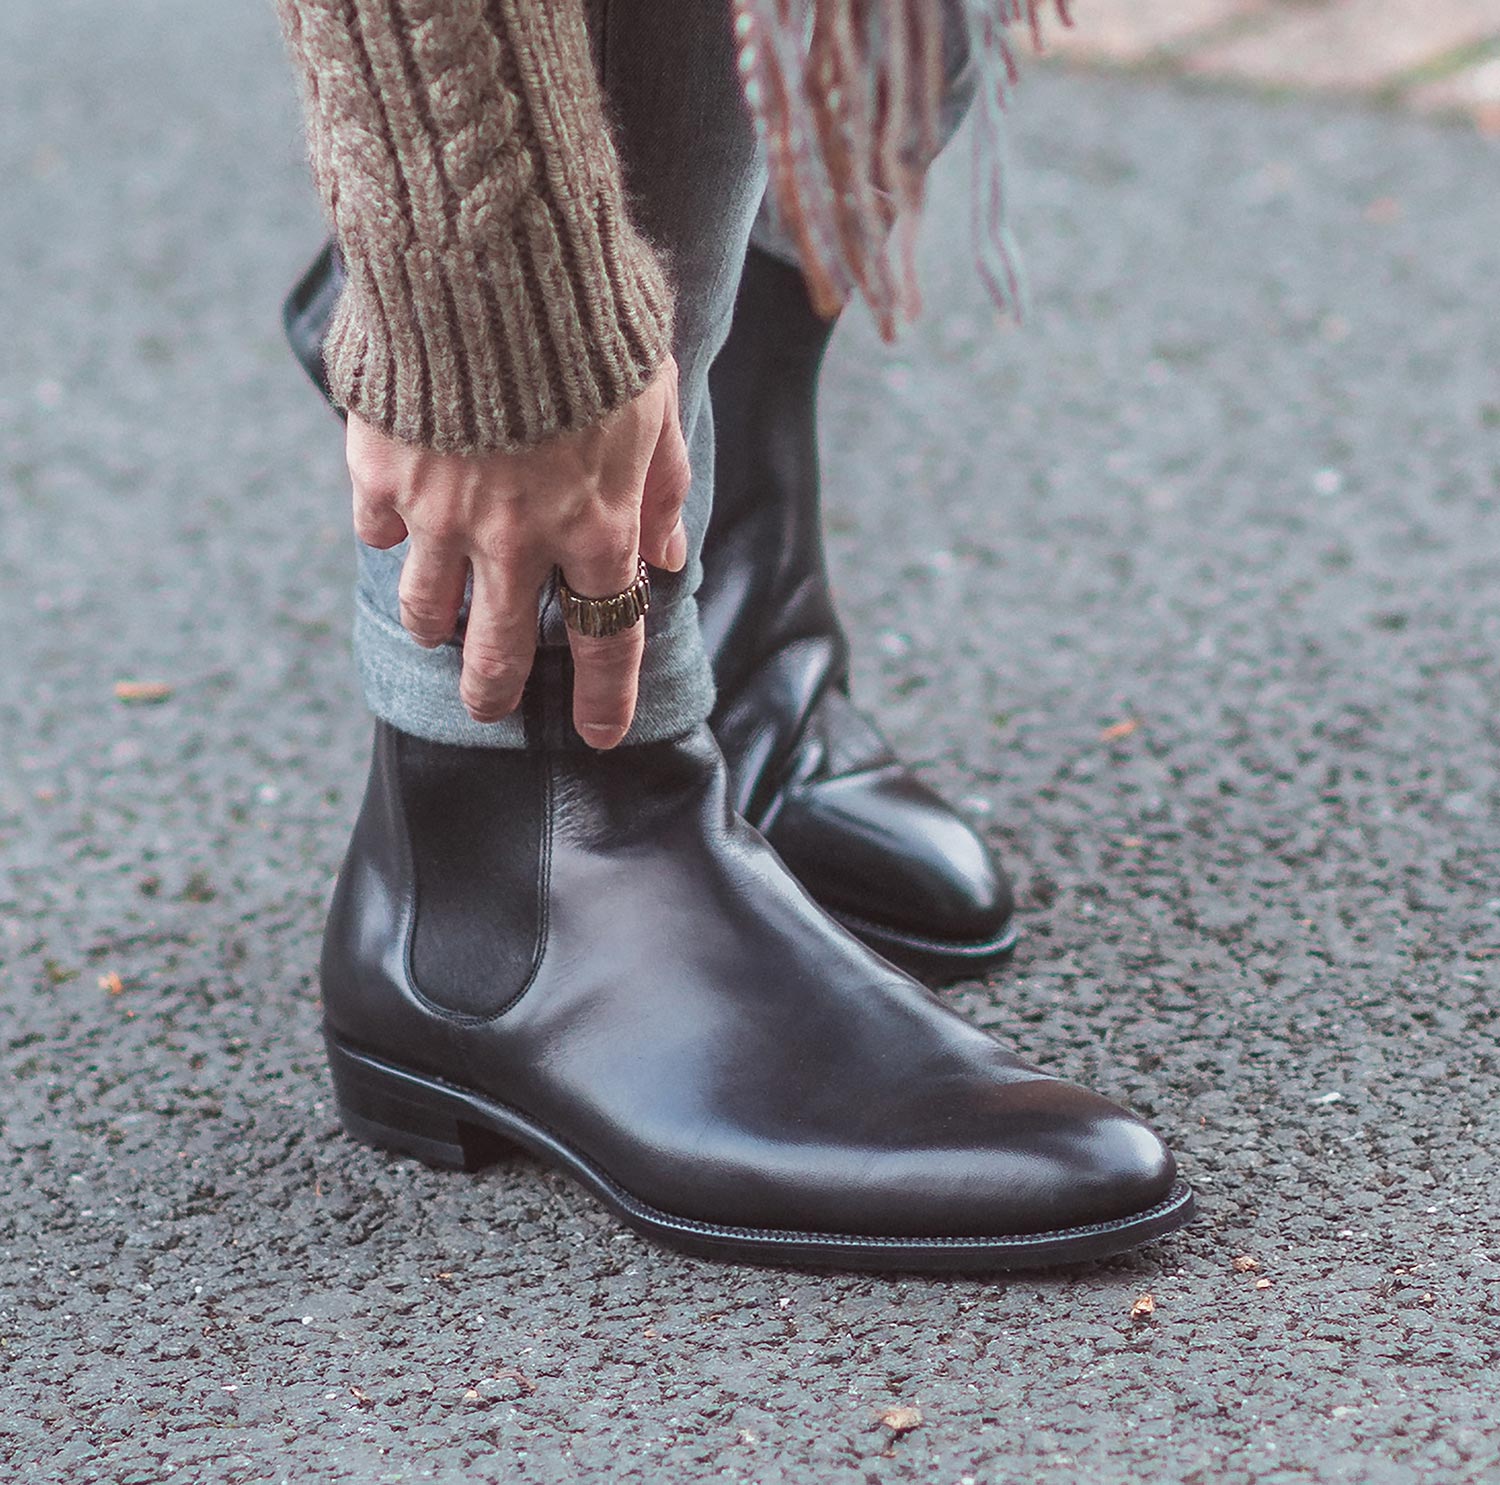 Arterton Yearn Shoemaker Chelsea Boots Review - Your Average Guy